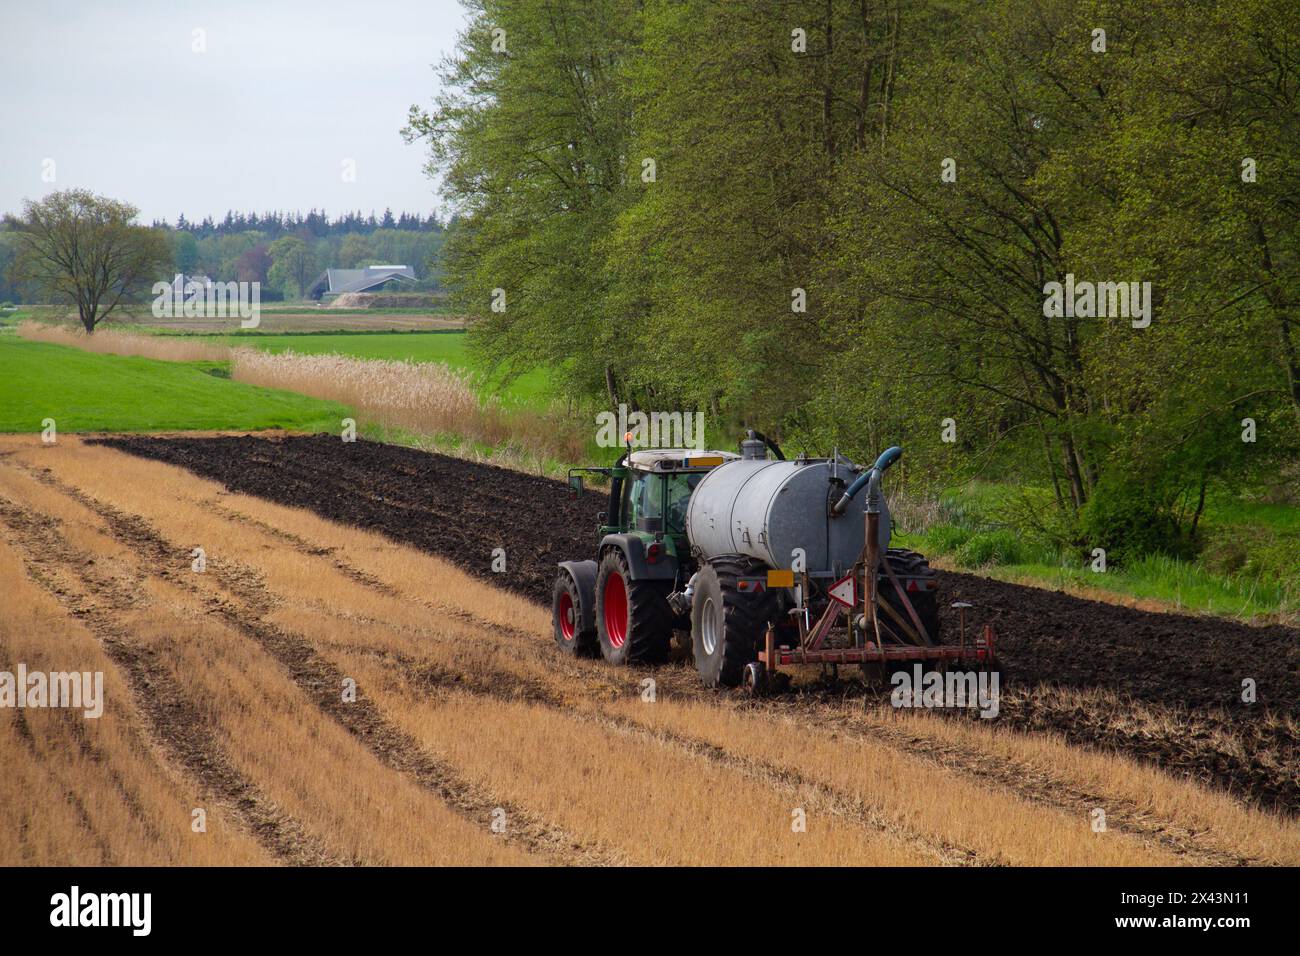 Tractor with slurry tank preparing field treated with glyphosate for cultivation by applying manure and plowing under sprayed plant residues Stock Photo